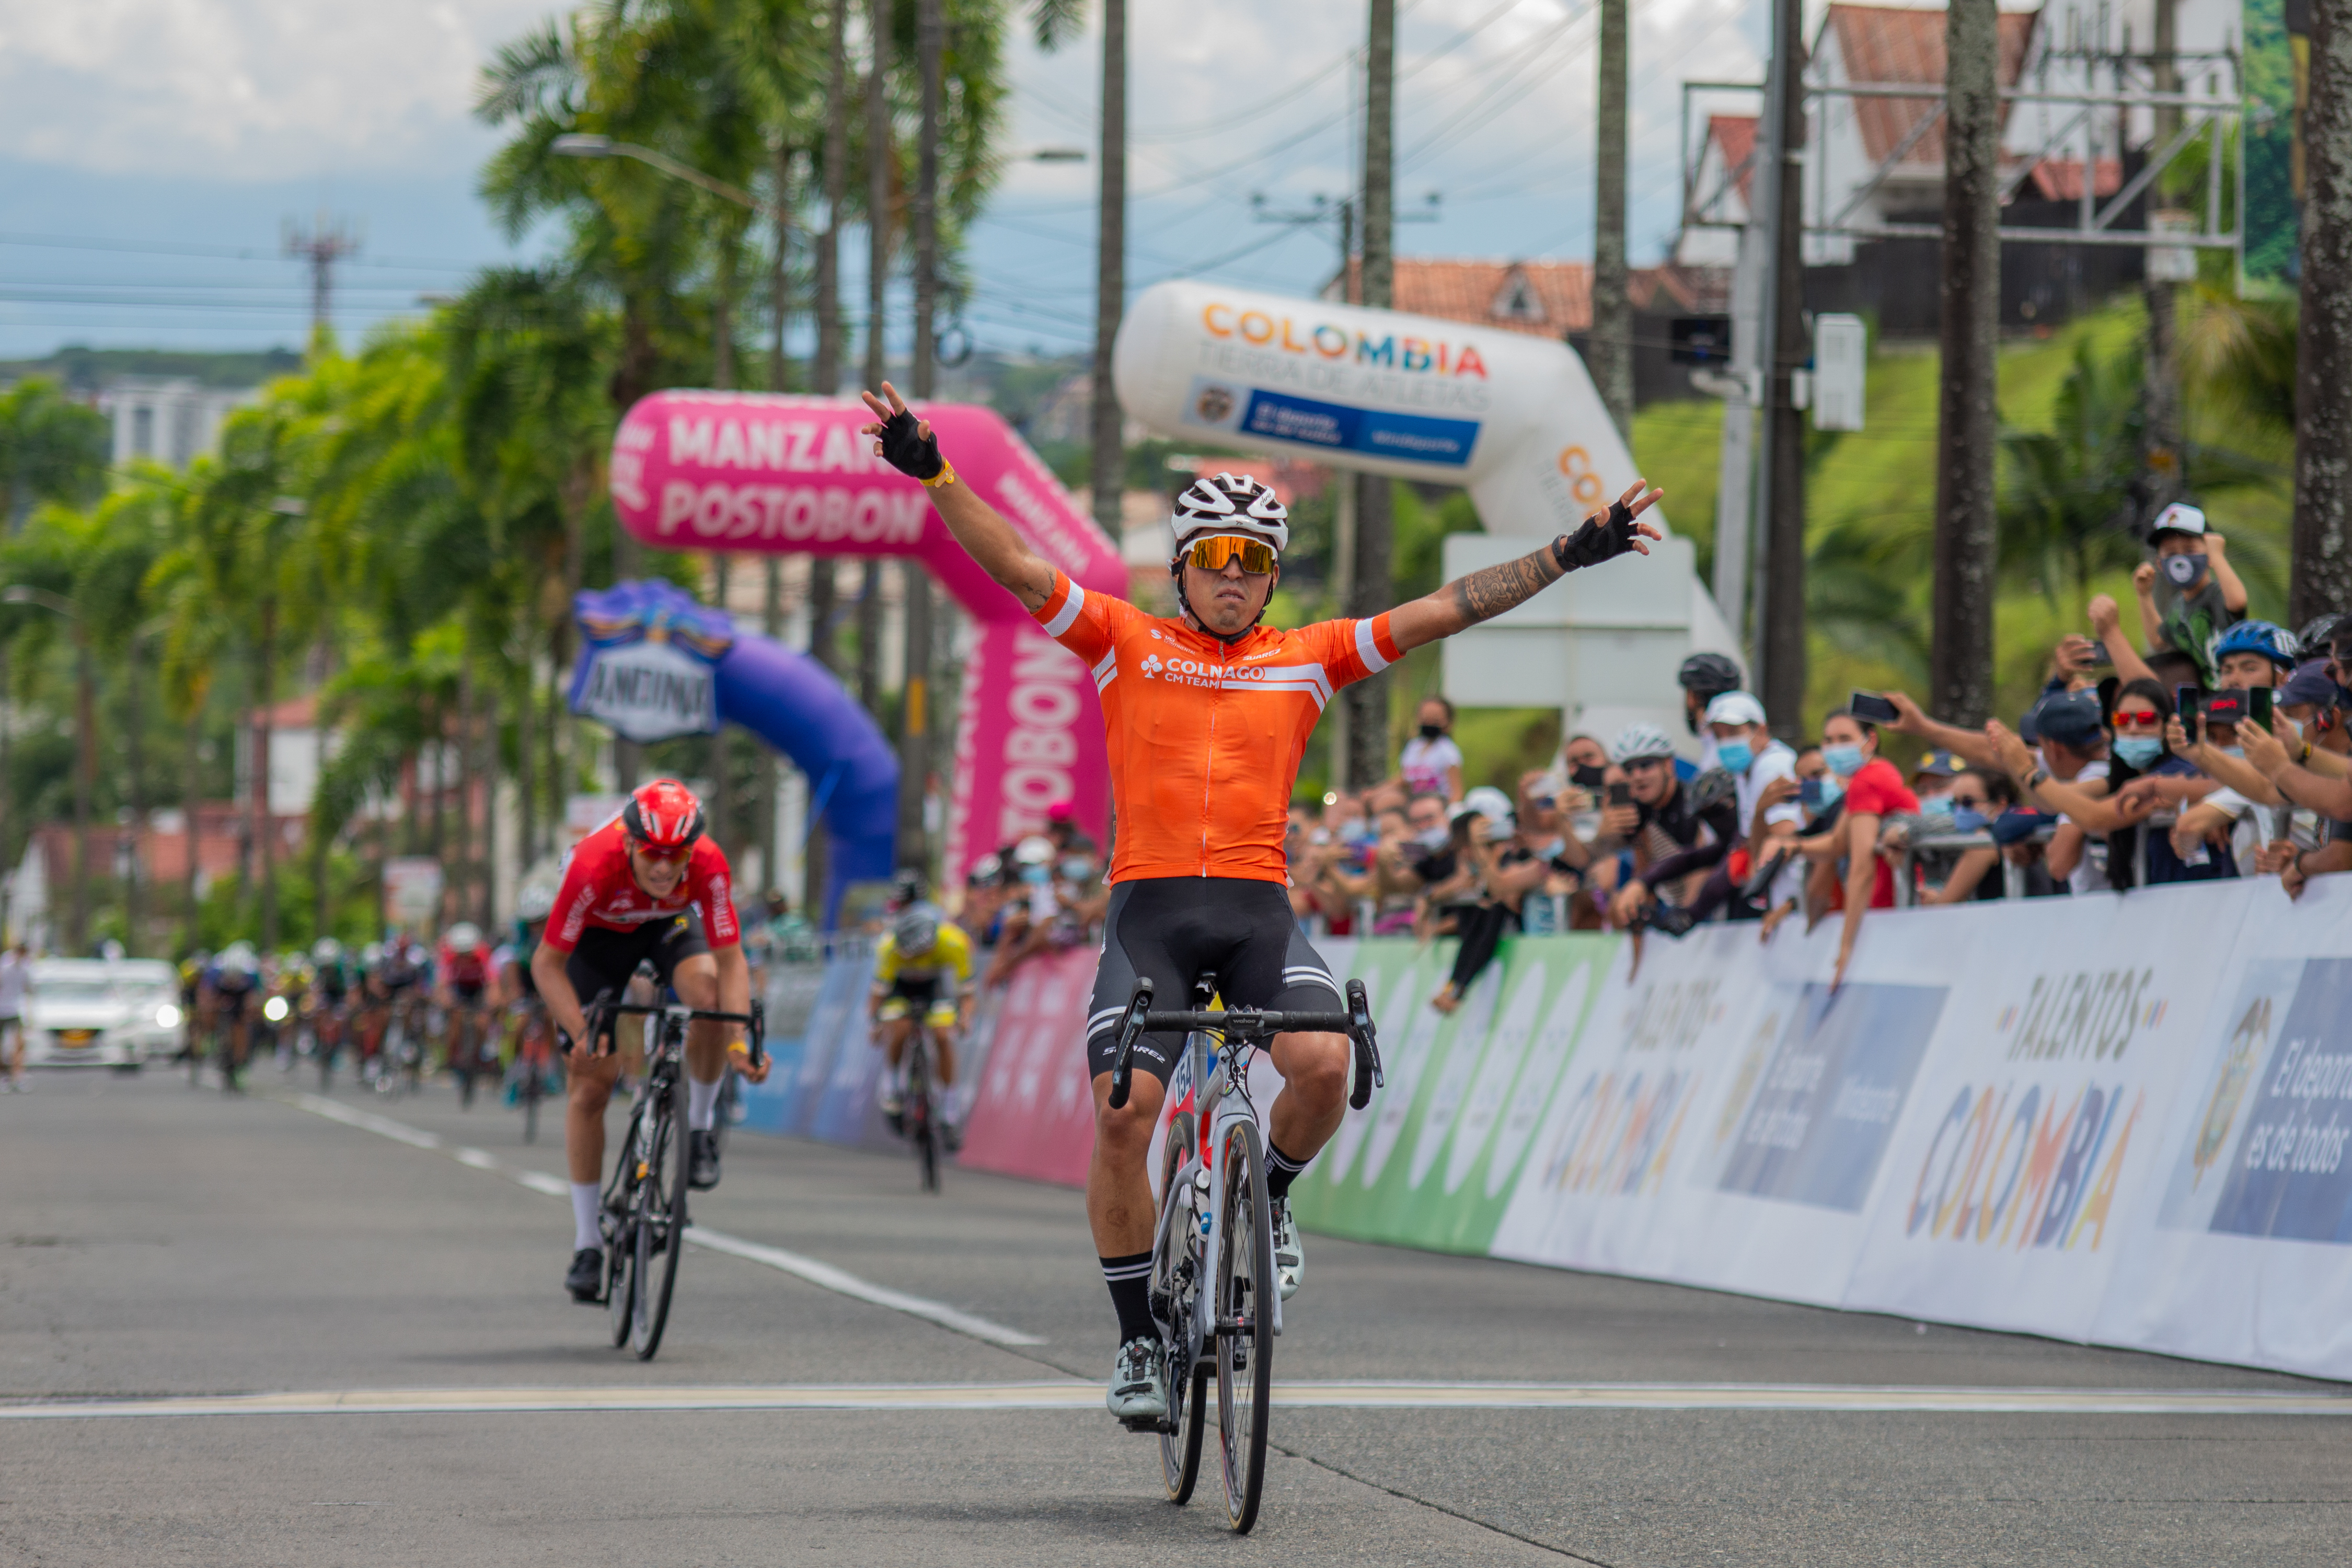 Cyclists Juan Esteban Guerrero of Colnago CM Team celebrating victory during the SUB-23 Qualifiers Colombian National Road Race Bicycle Championship in Pereira, Colombia on June 19, 2021.